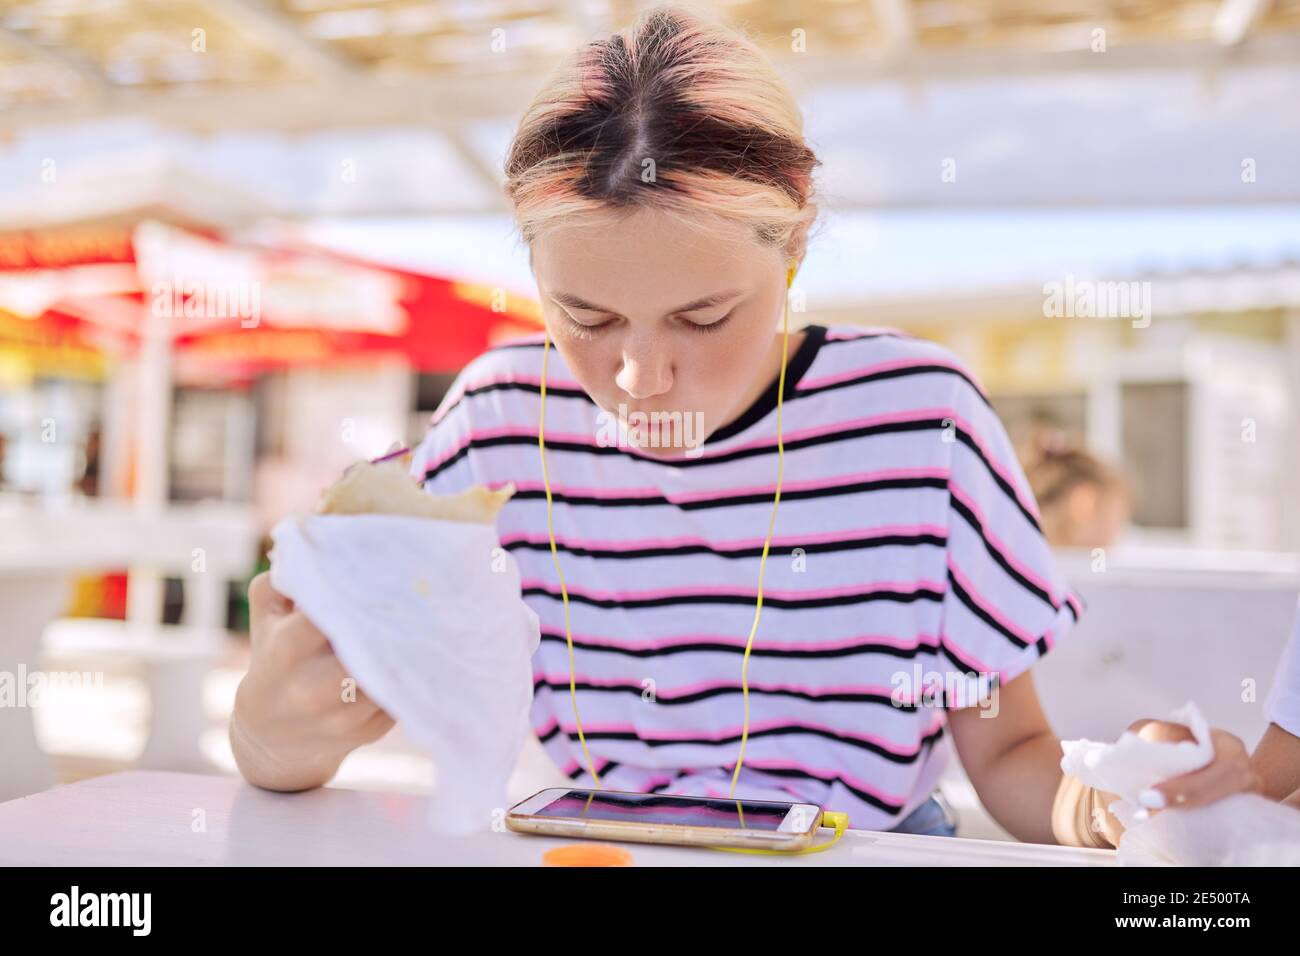 Teen girl eating a sandwich, burger, looking at the smartphone screen in headphones Stock Photo